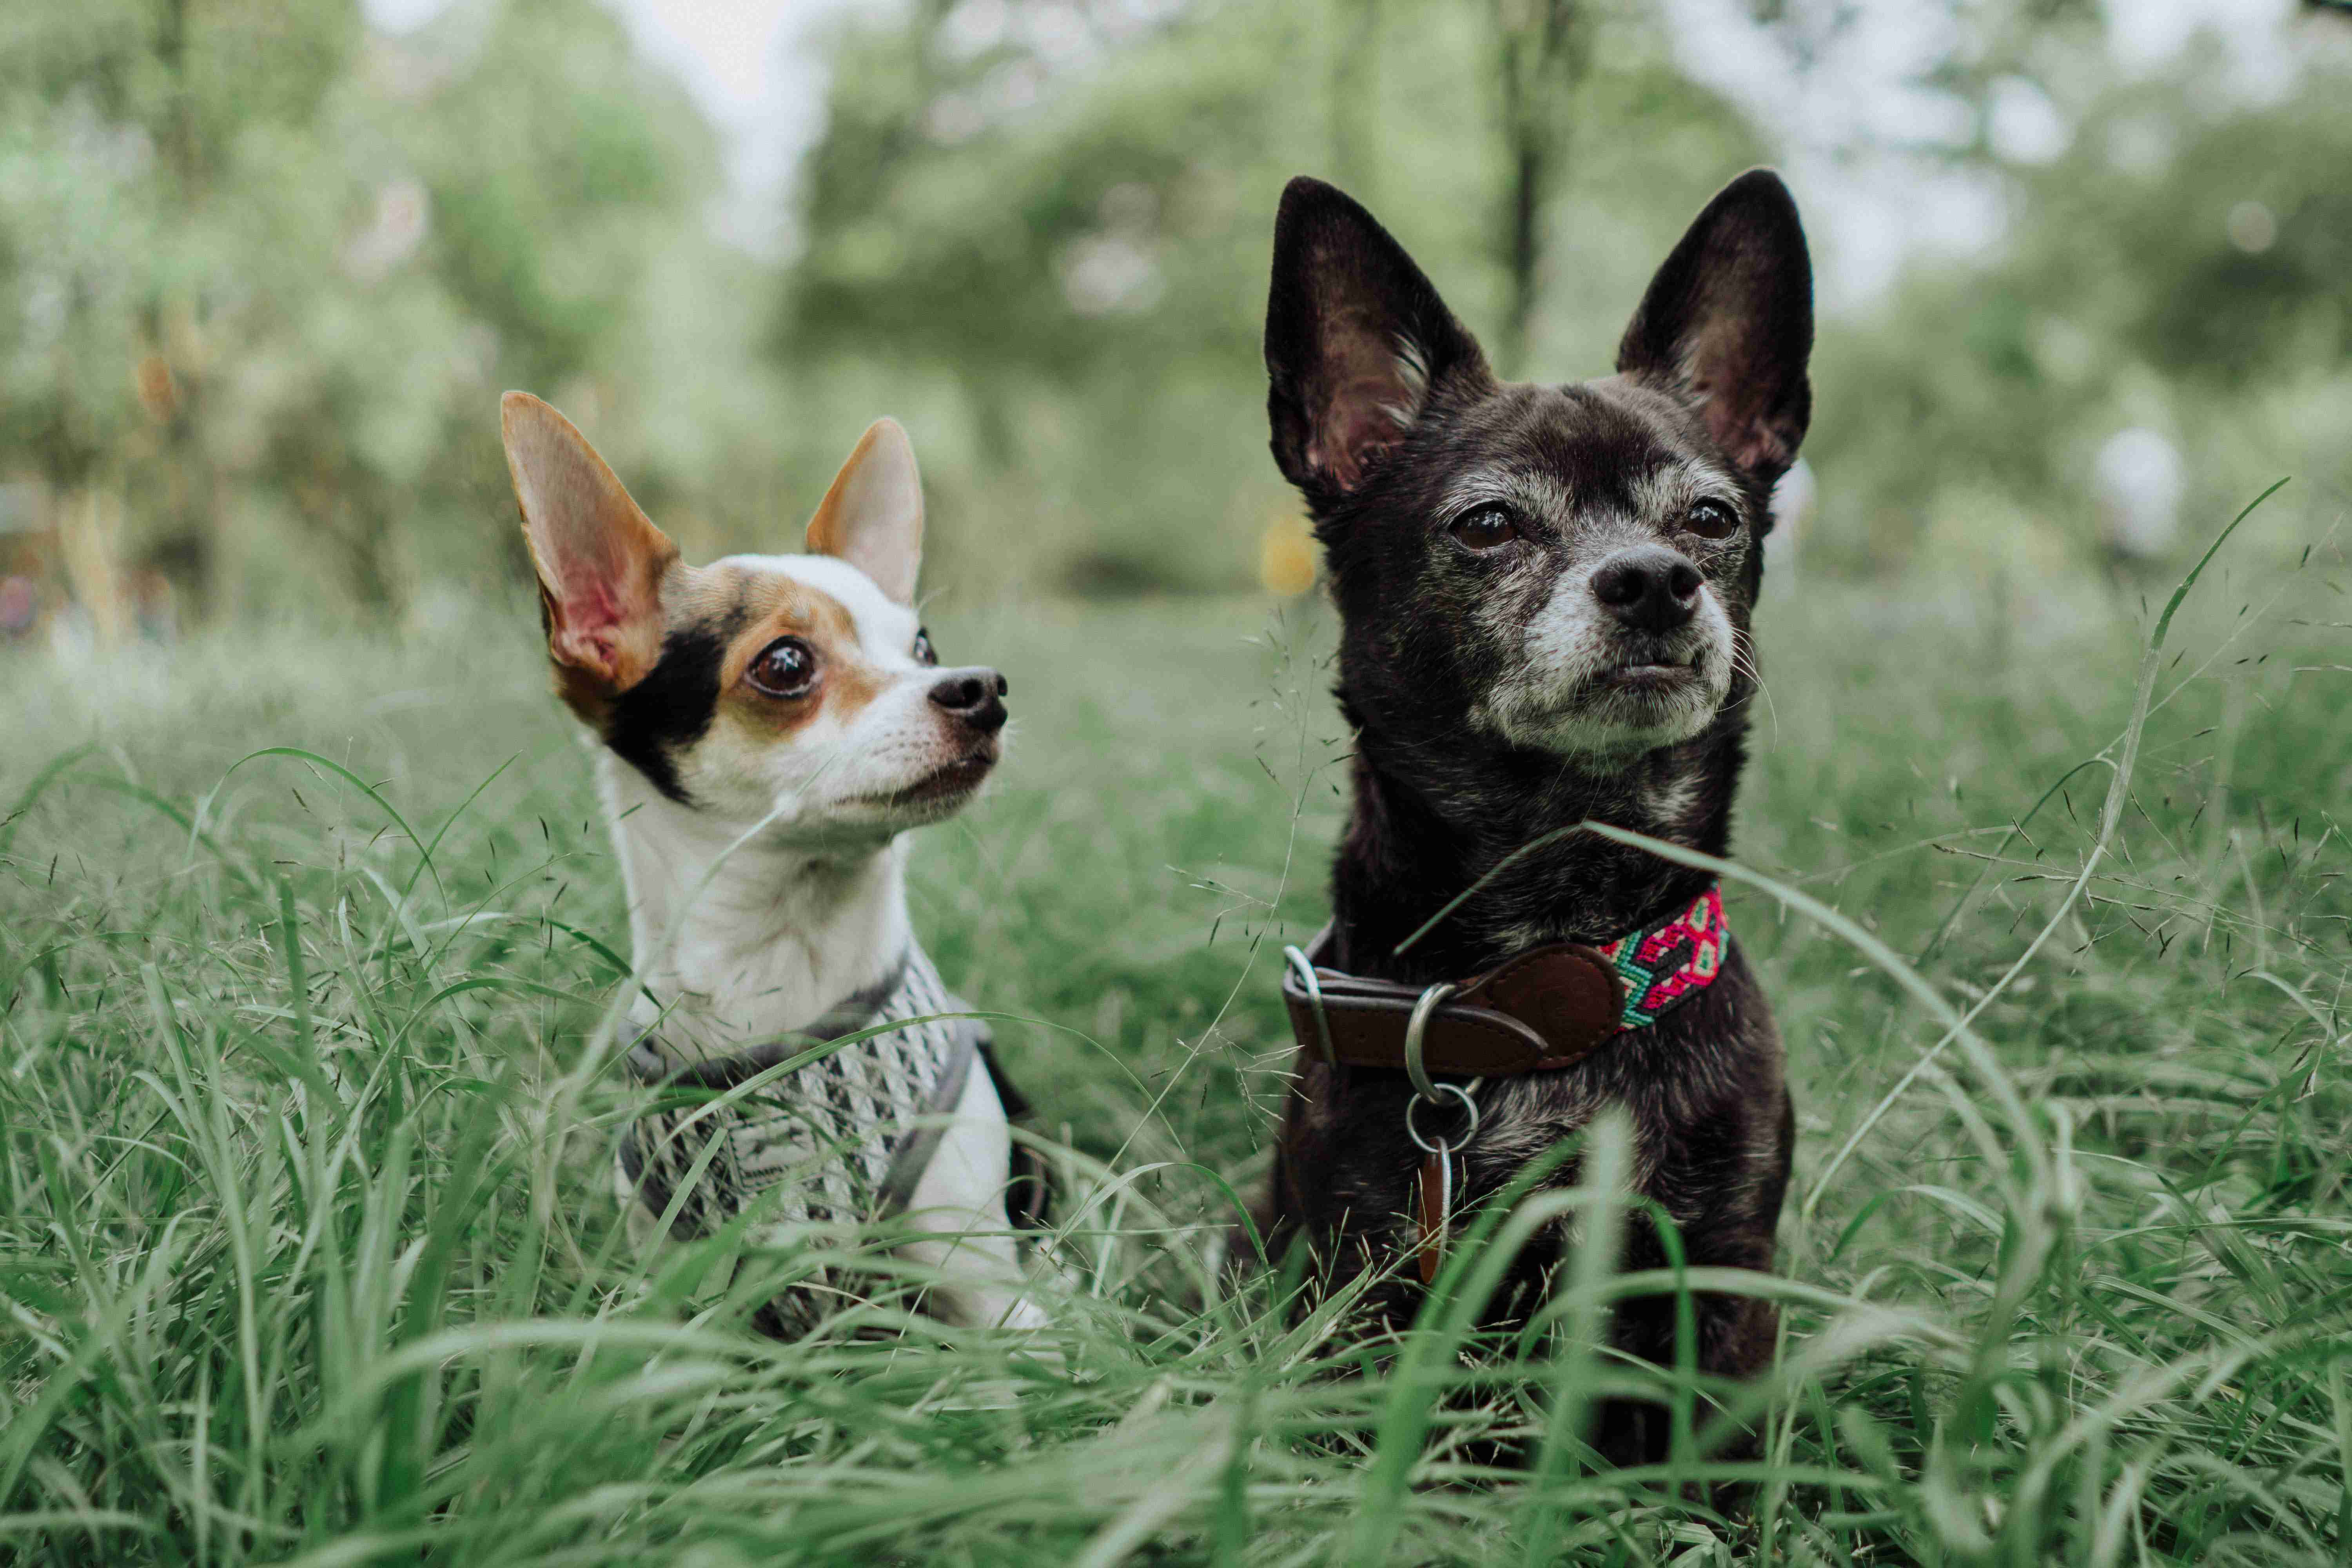 Is aggression and anger common in Chihuahuas?